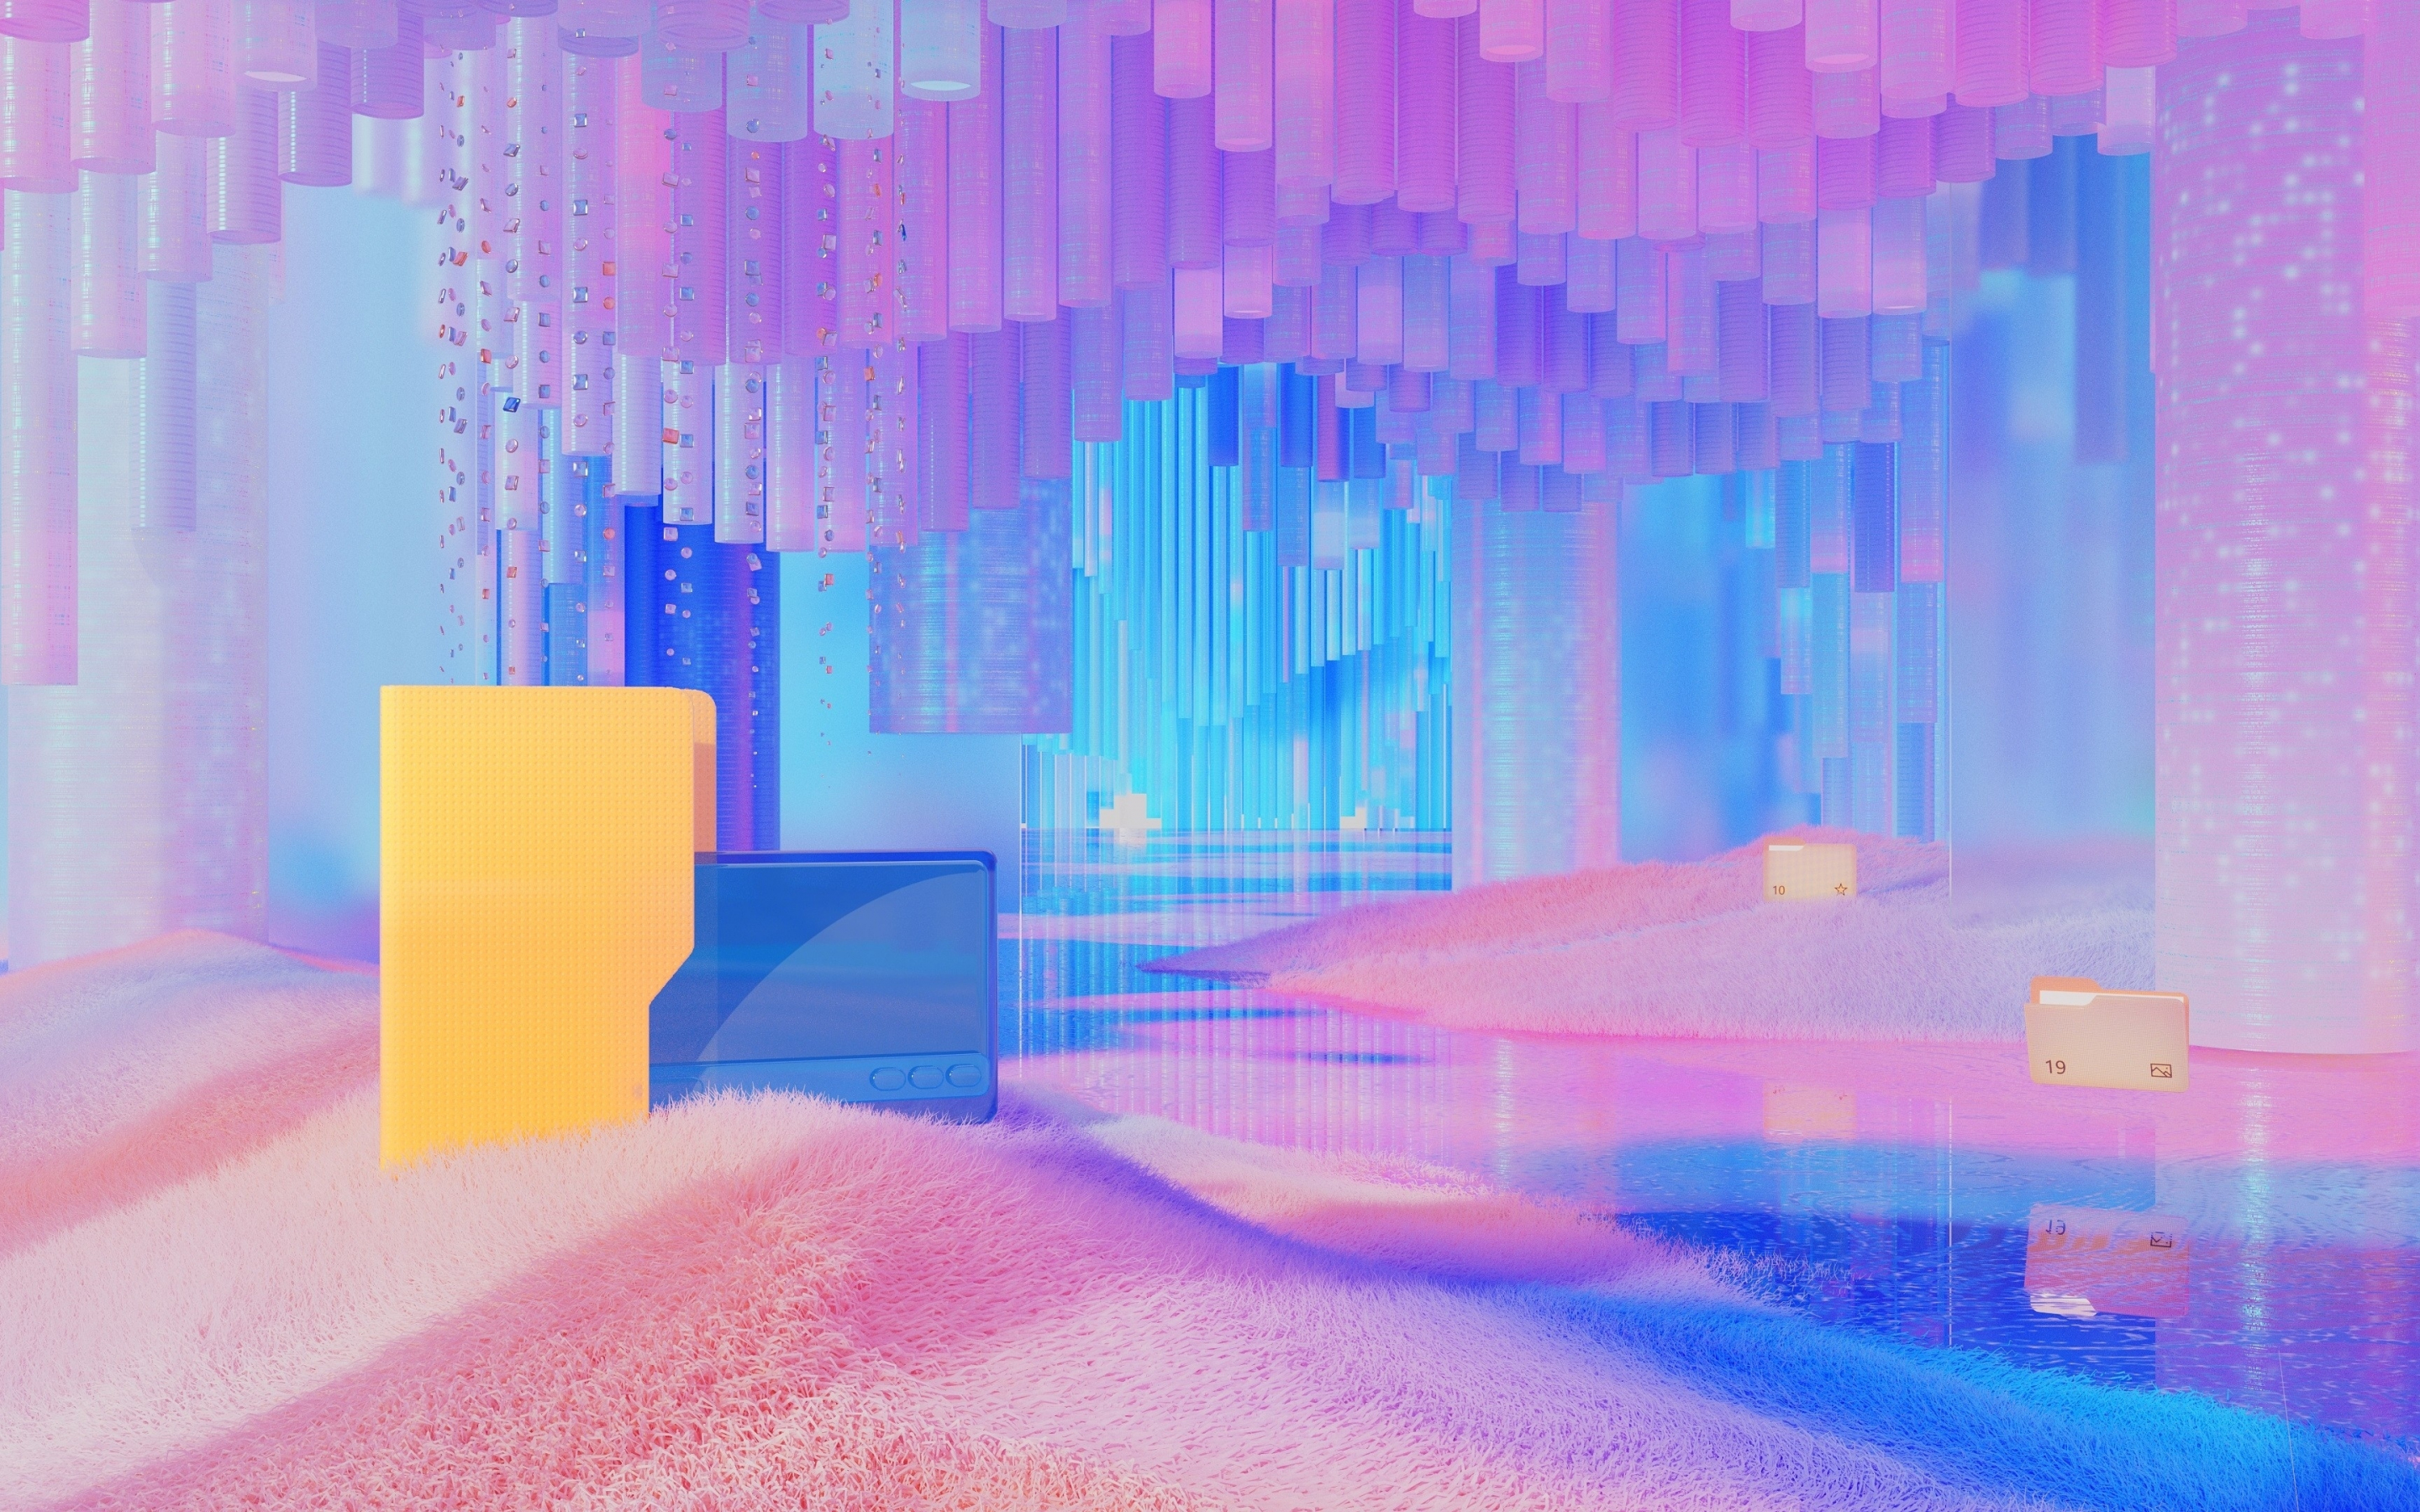 Abstract 3D shapes, colorful, Microsoft 365, 2880x1800 wallpaper